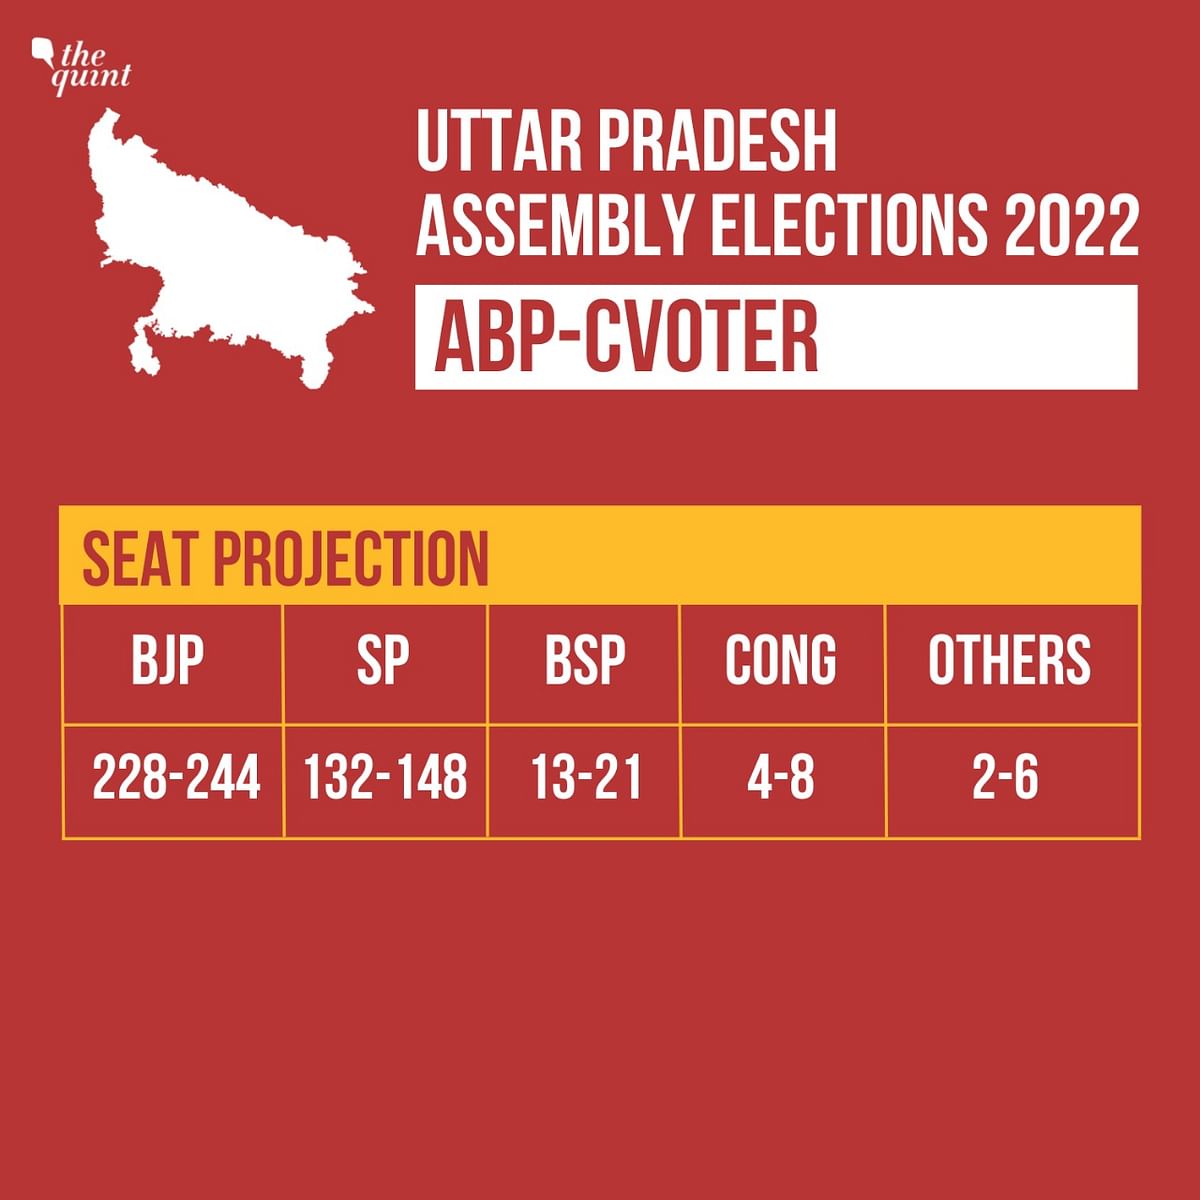 Catch the exit poll results for Uttar Pradesh Assembly Elections here.